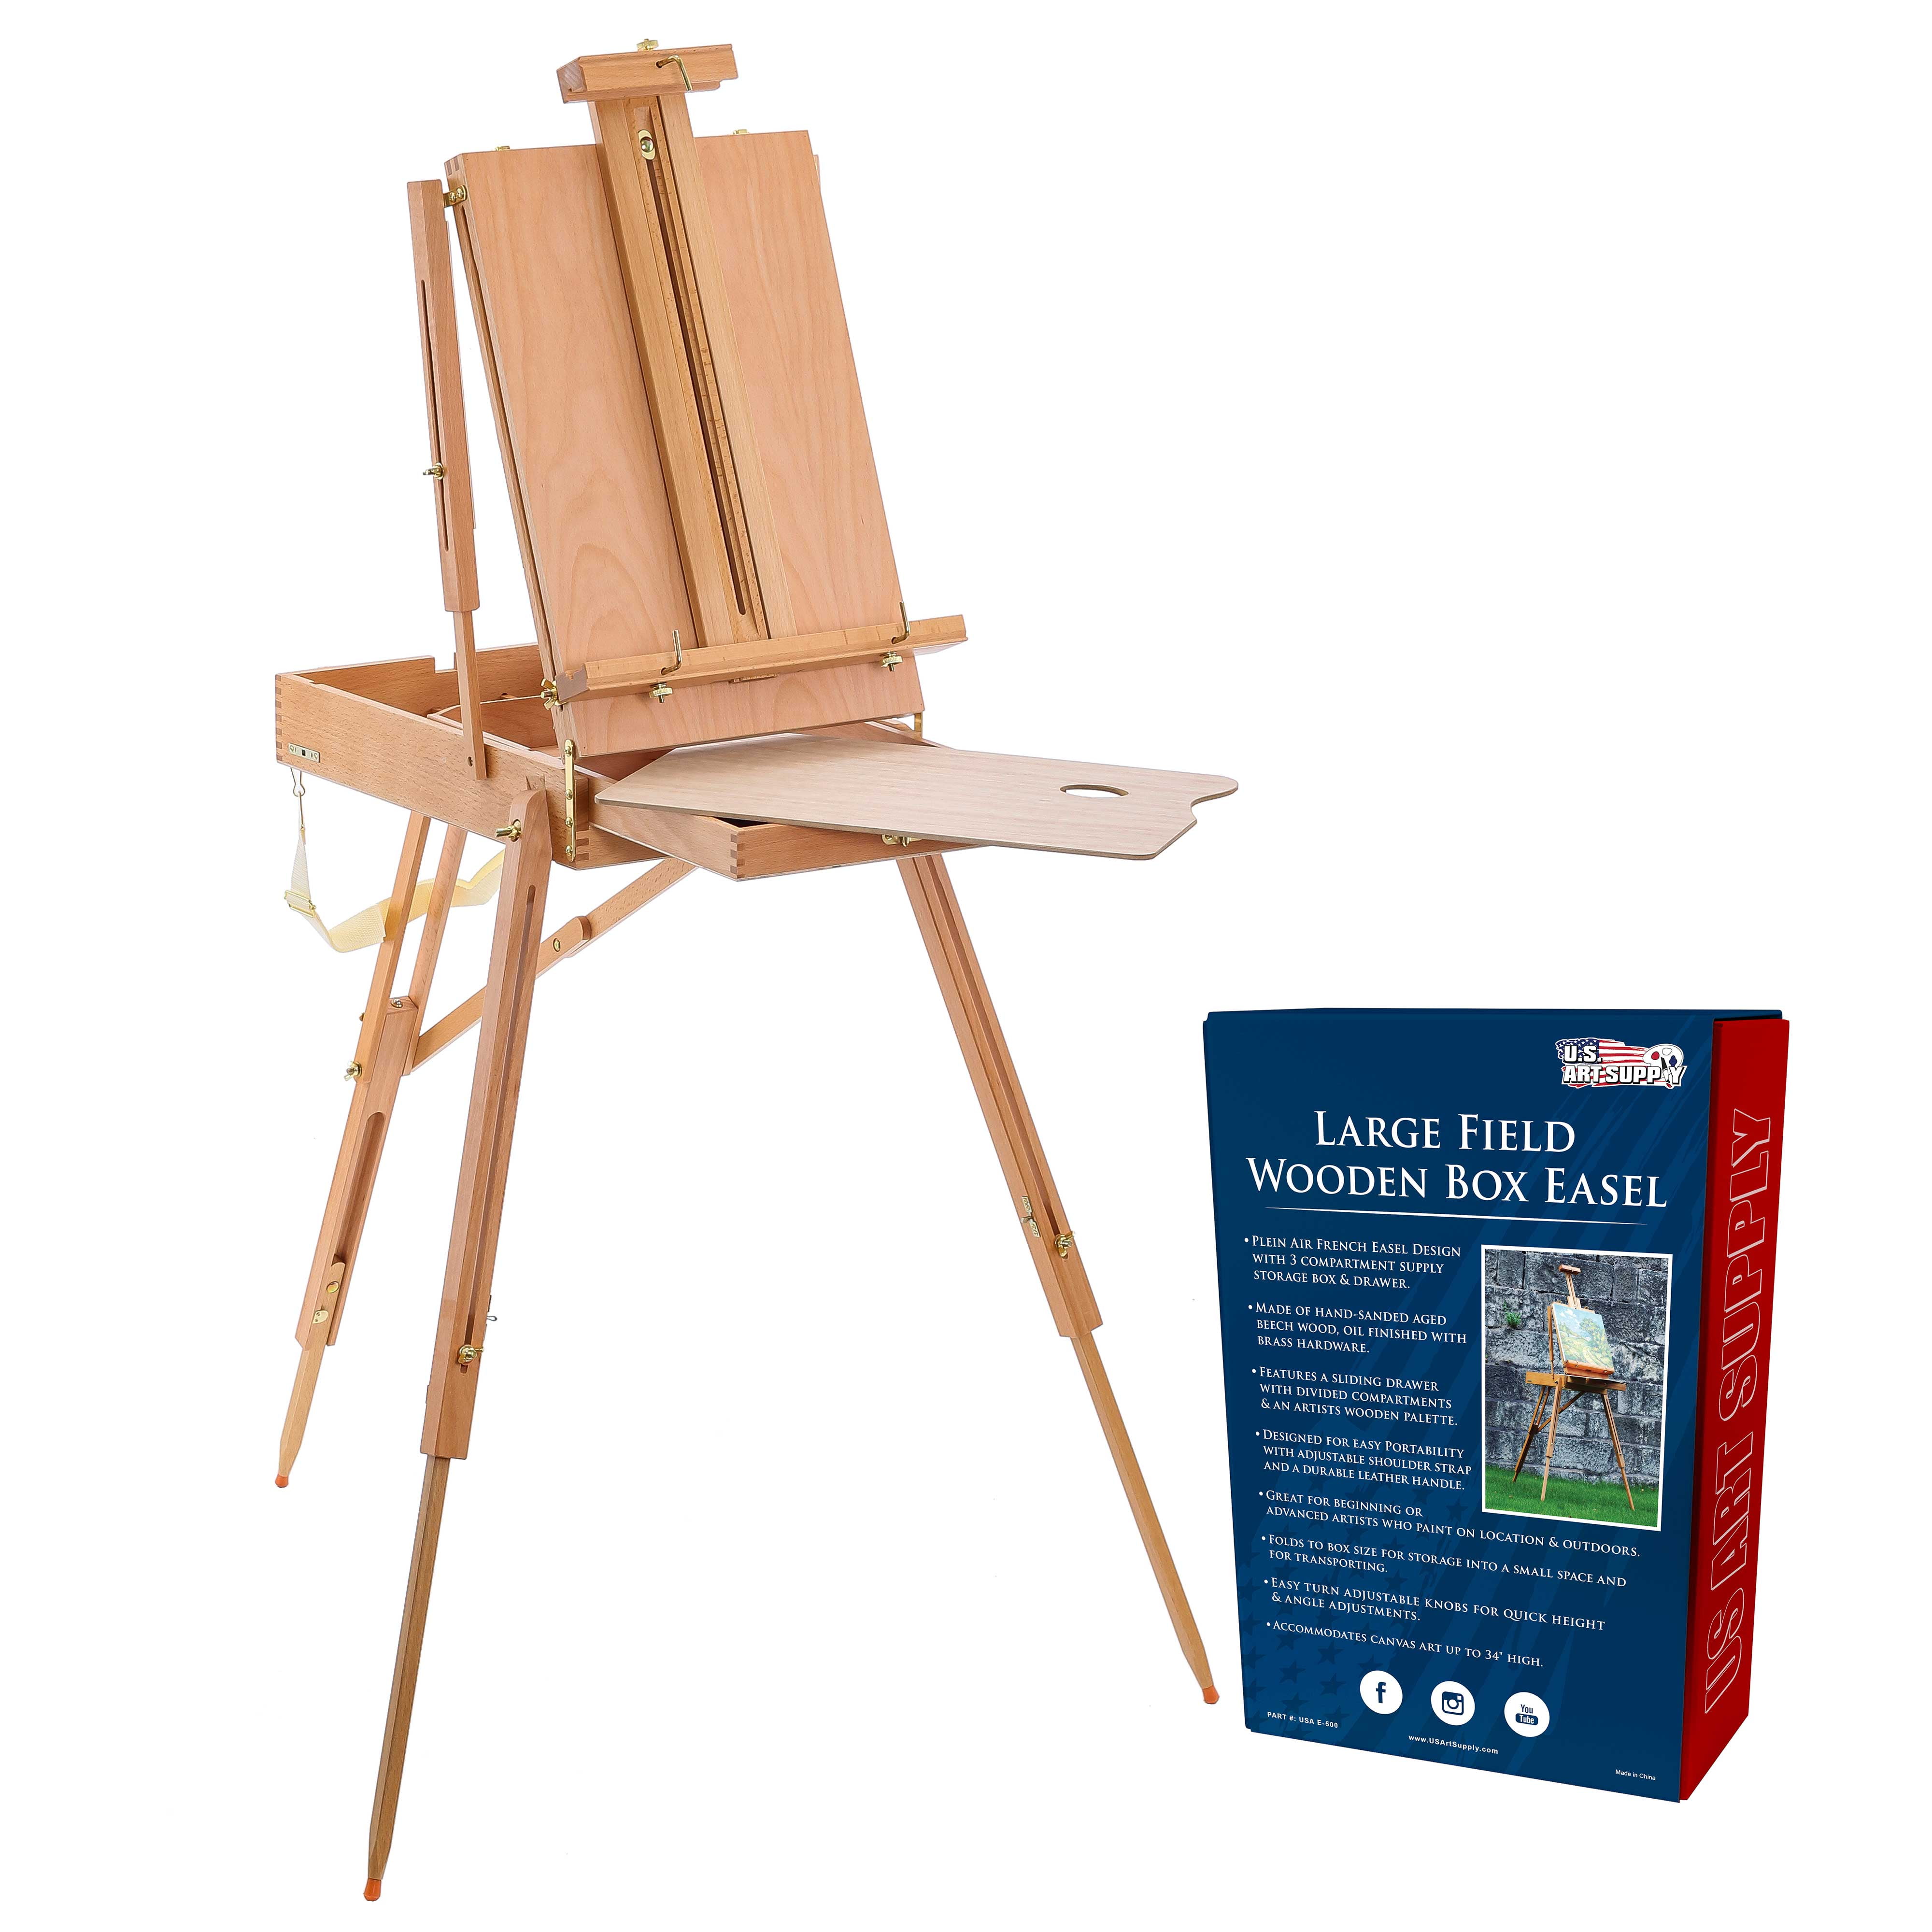 Painters Studio Wood Artist Easel Adjustable Drawing Stand Hold Canvas up  to 50